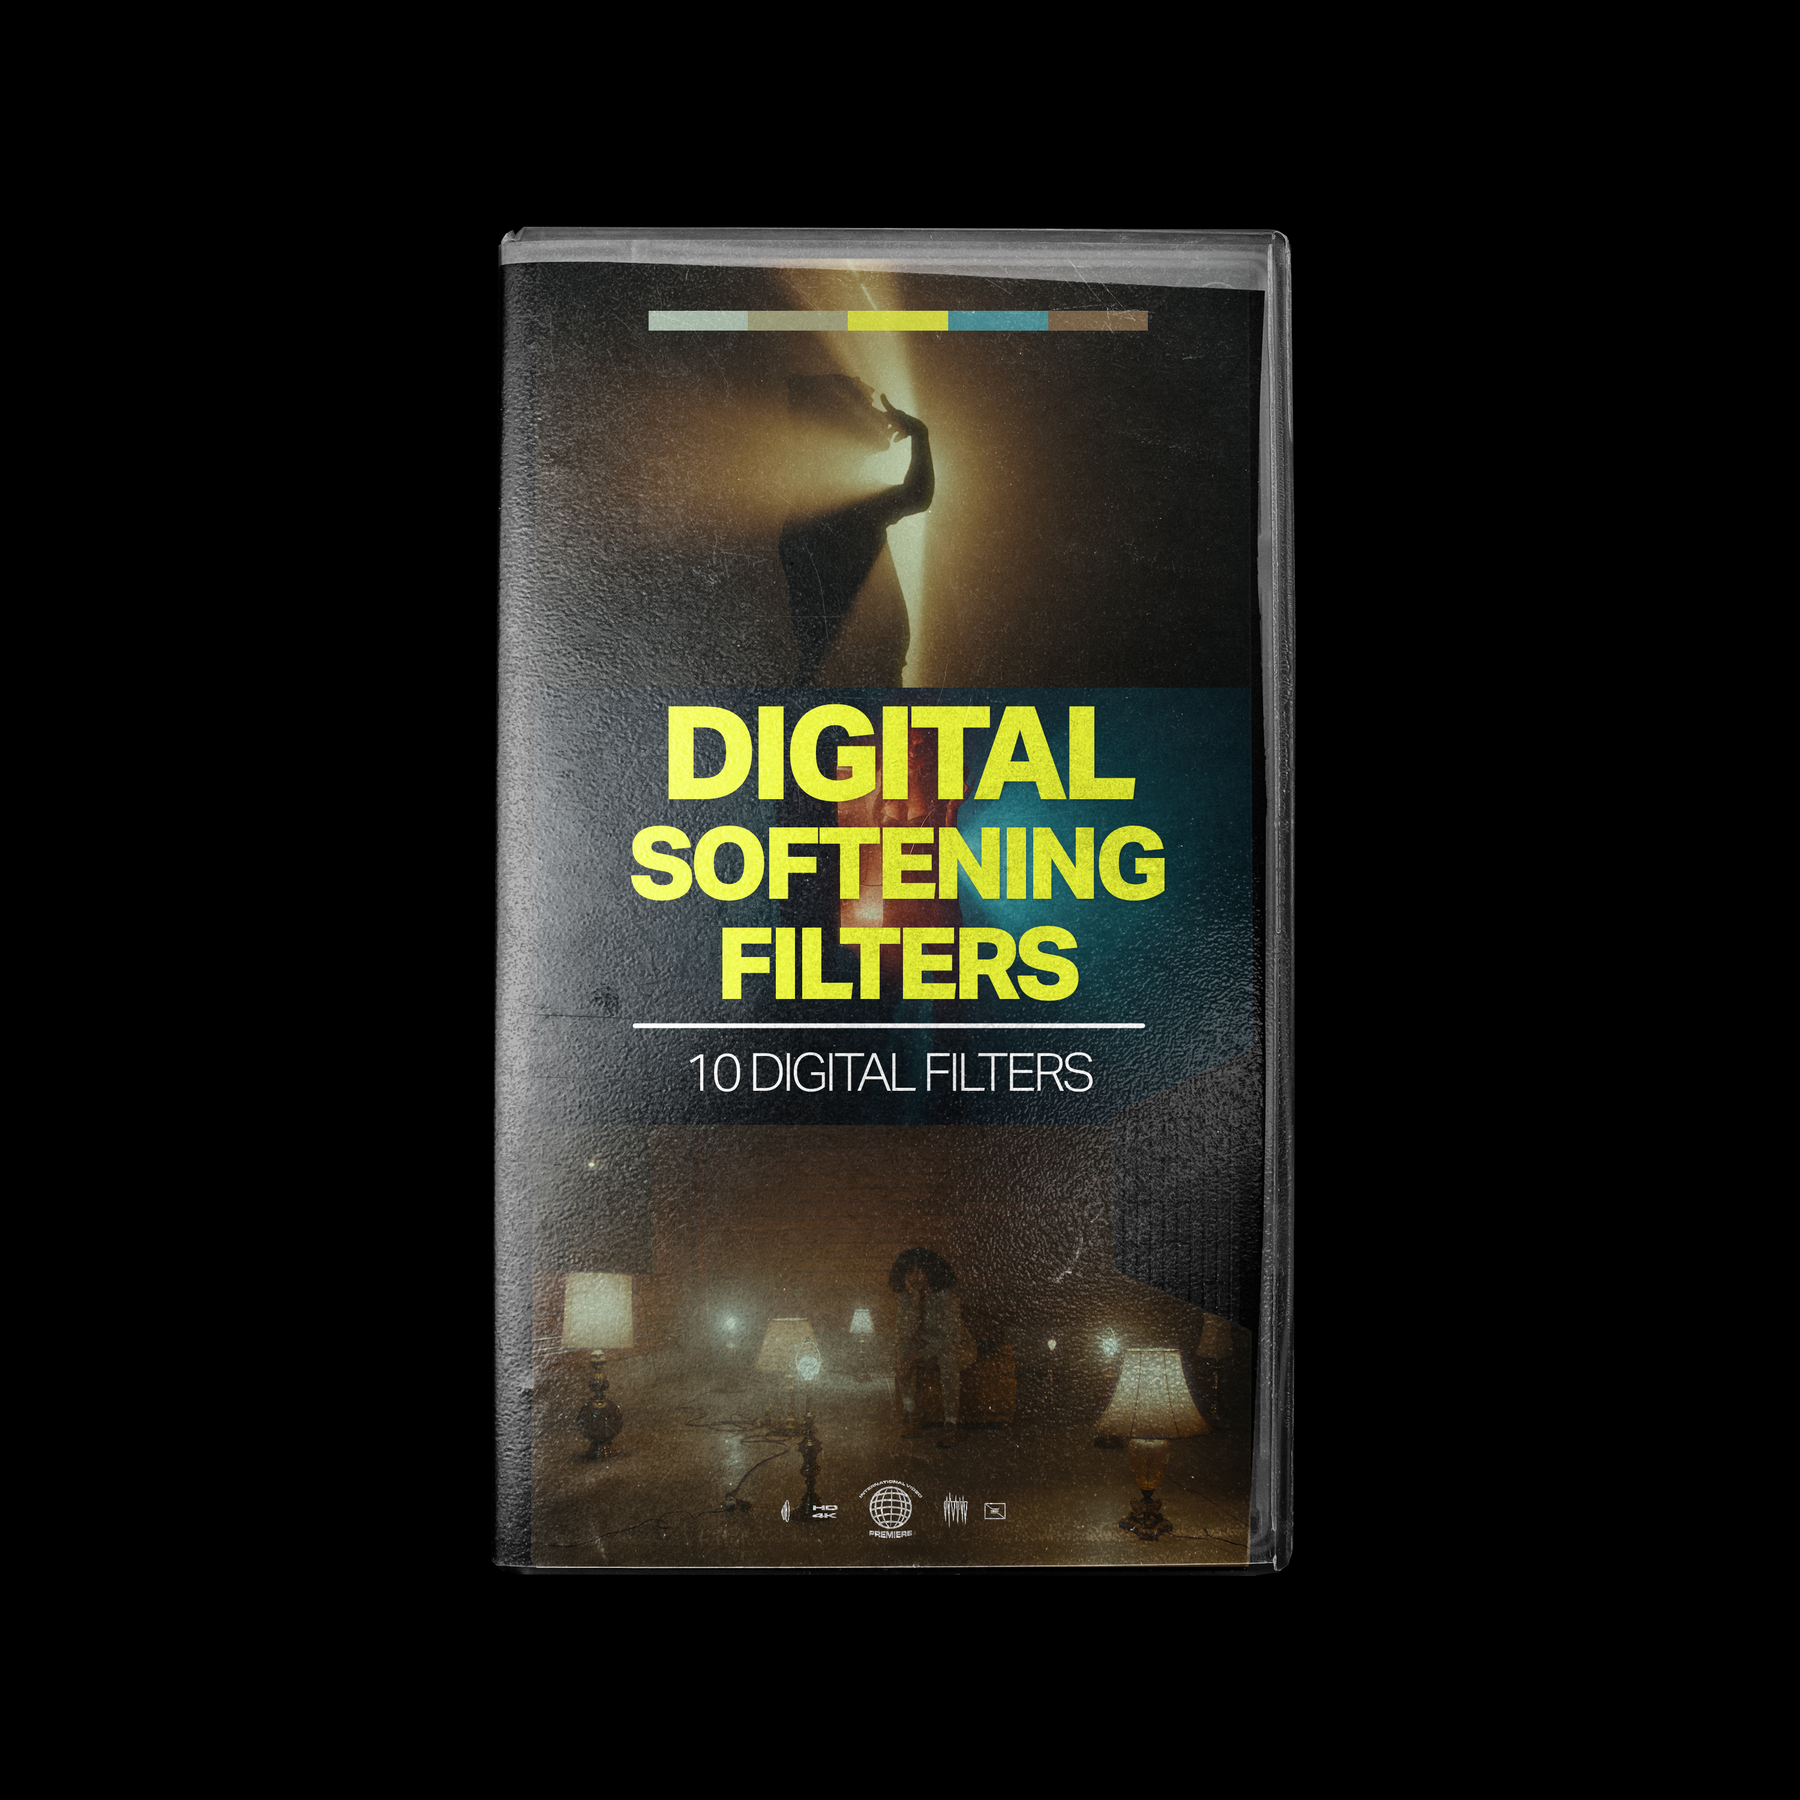 Digital Softening Filters[Tropic Colour]